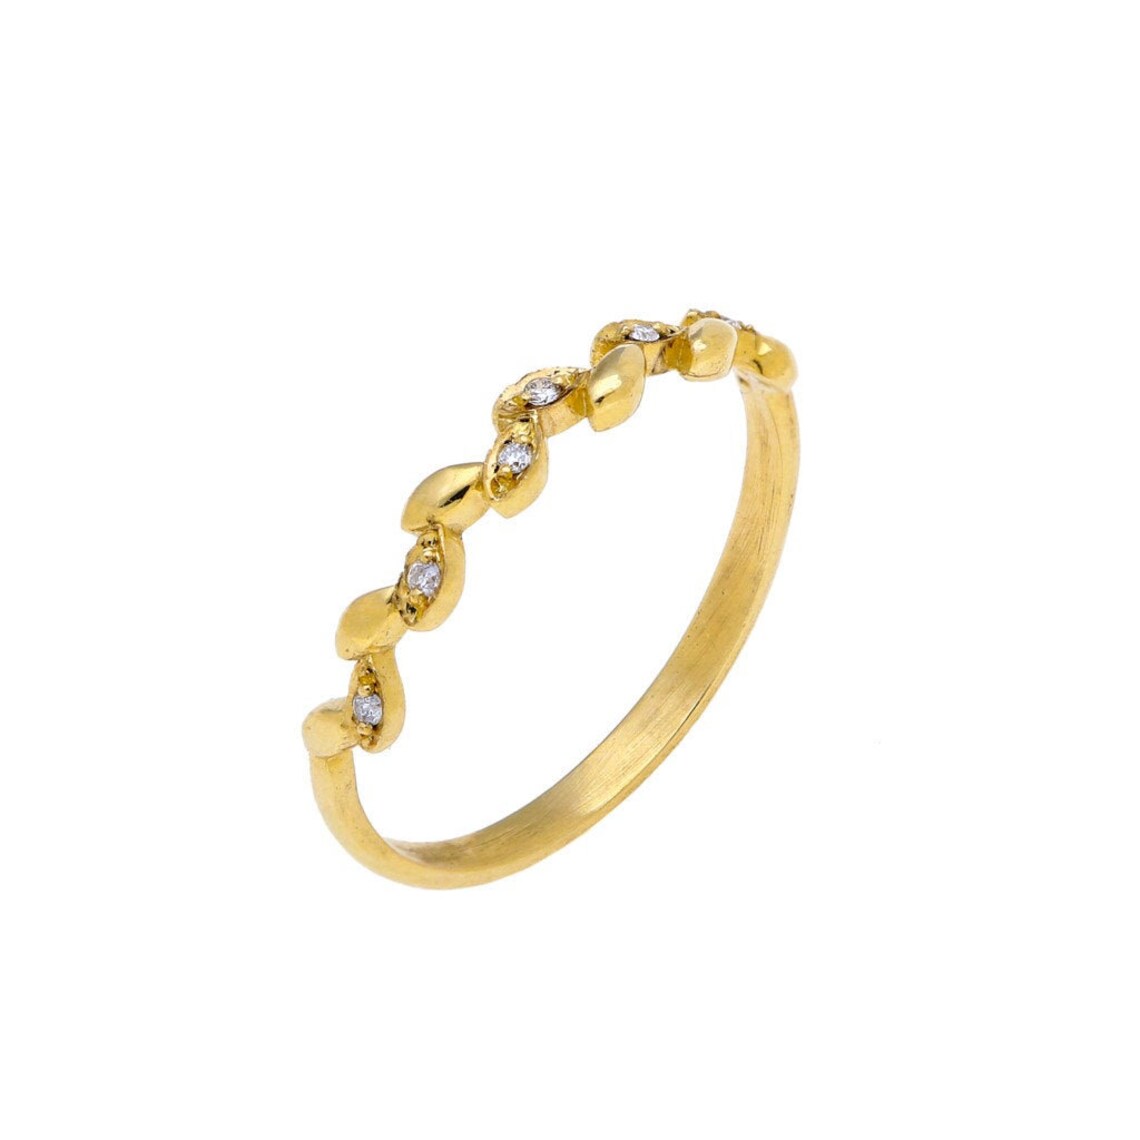 Gold Leaf Diamond Ring 14k Solid Gold Ring Small Diamond - Etsy